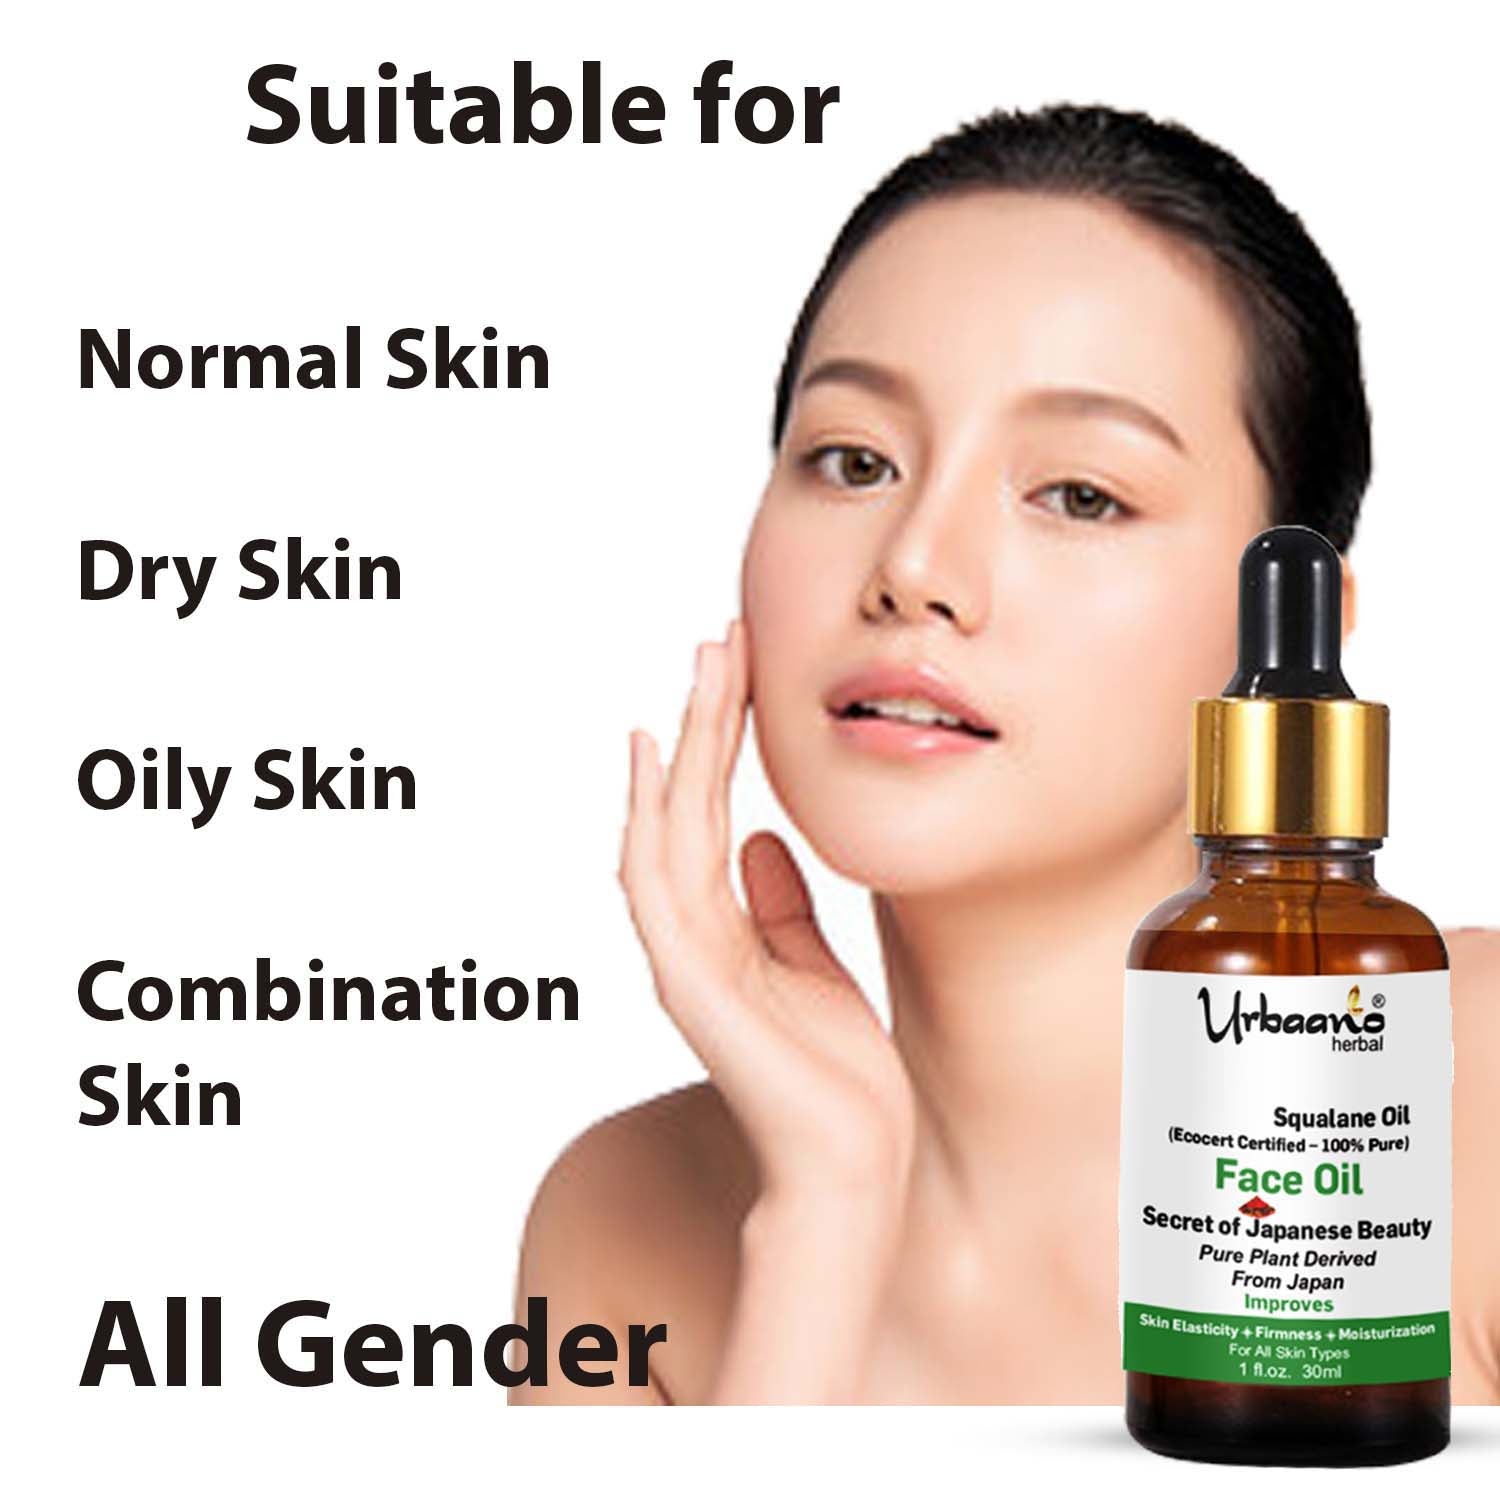 urbaano herbal face oil pure natural olive squalane oil from japan for all skin types, men & women